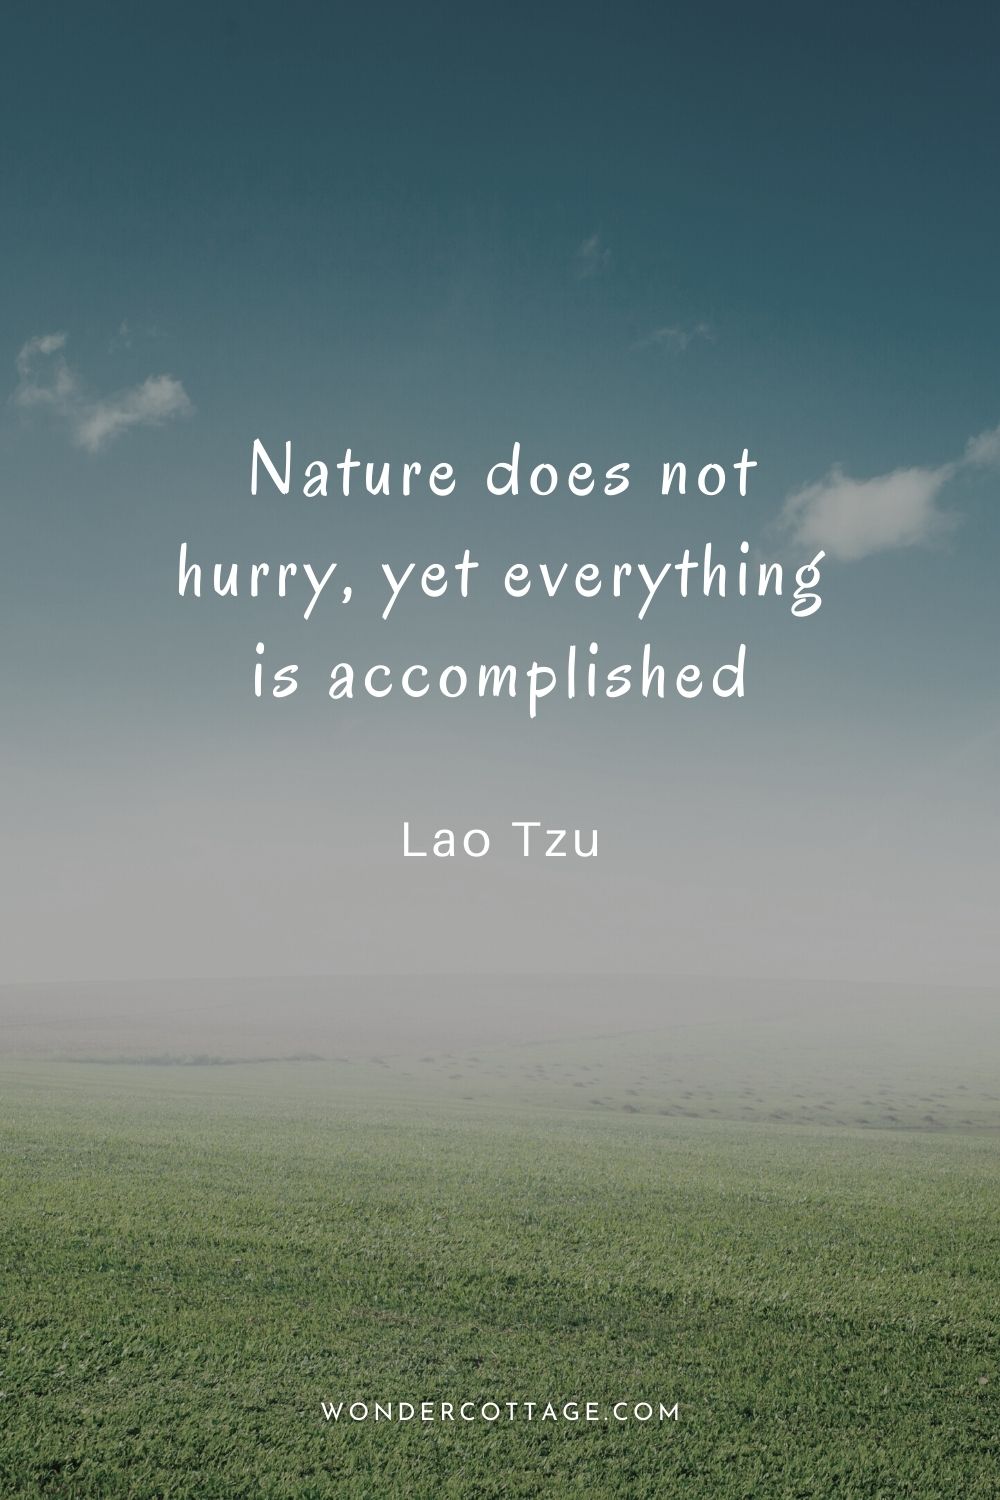 Nature does not hurry, yet everything is accomplished.  Lao Tzu